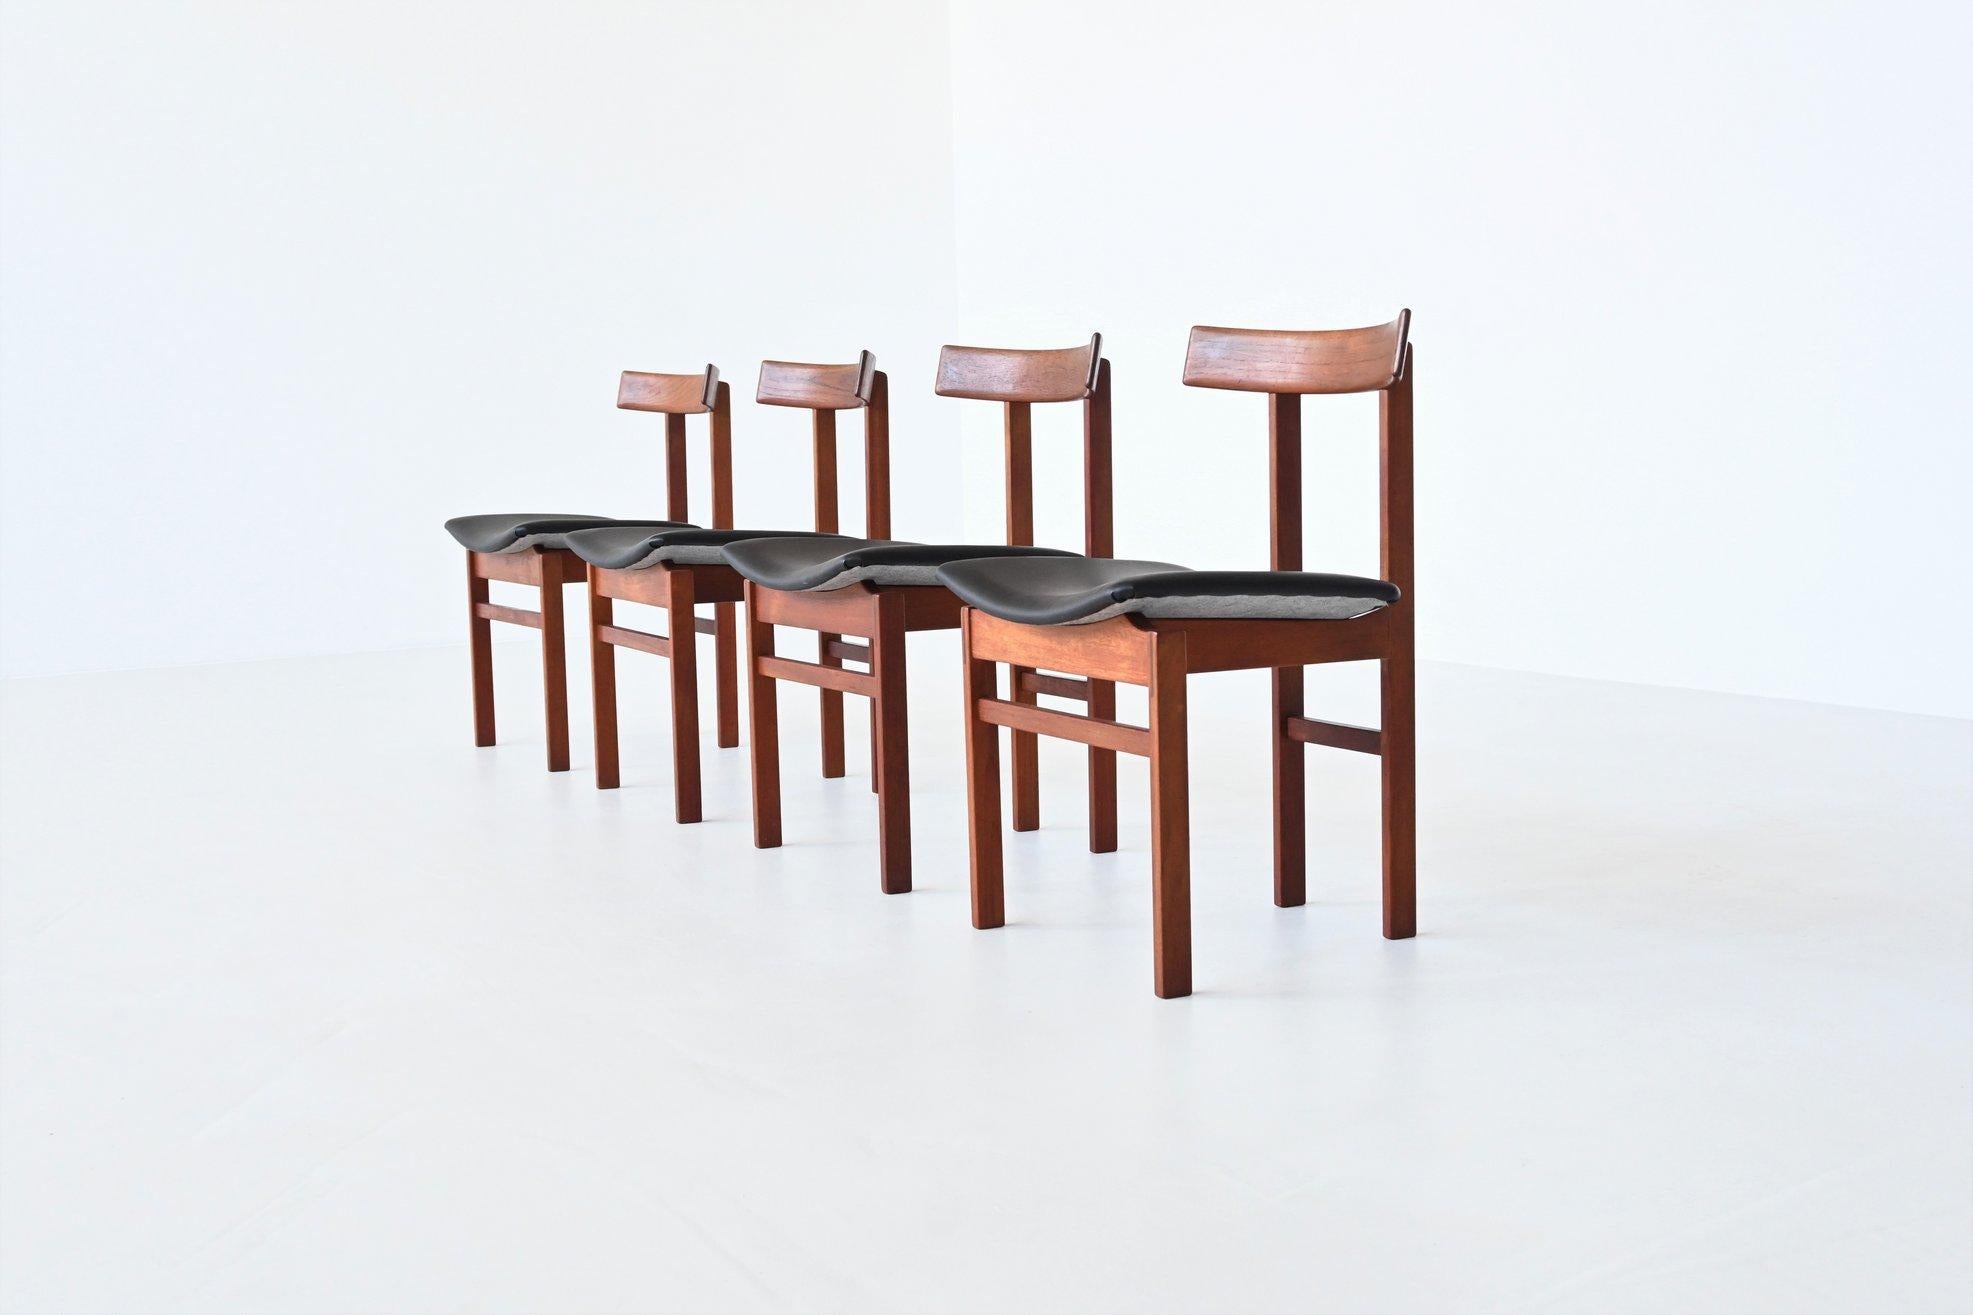 Fantastic set of four dining chairs model 193 designed by Inger Klingenberg and manufactured by France & Søn, Denmark 1960. The chairs feature a striking sculptural design and solid teak construction. The standout characteristic of these chairs are